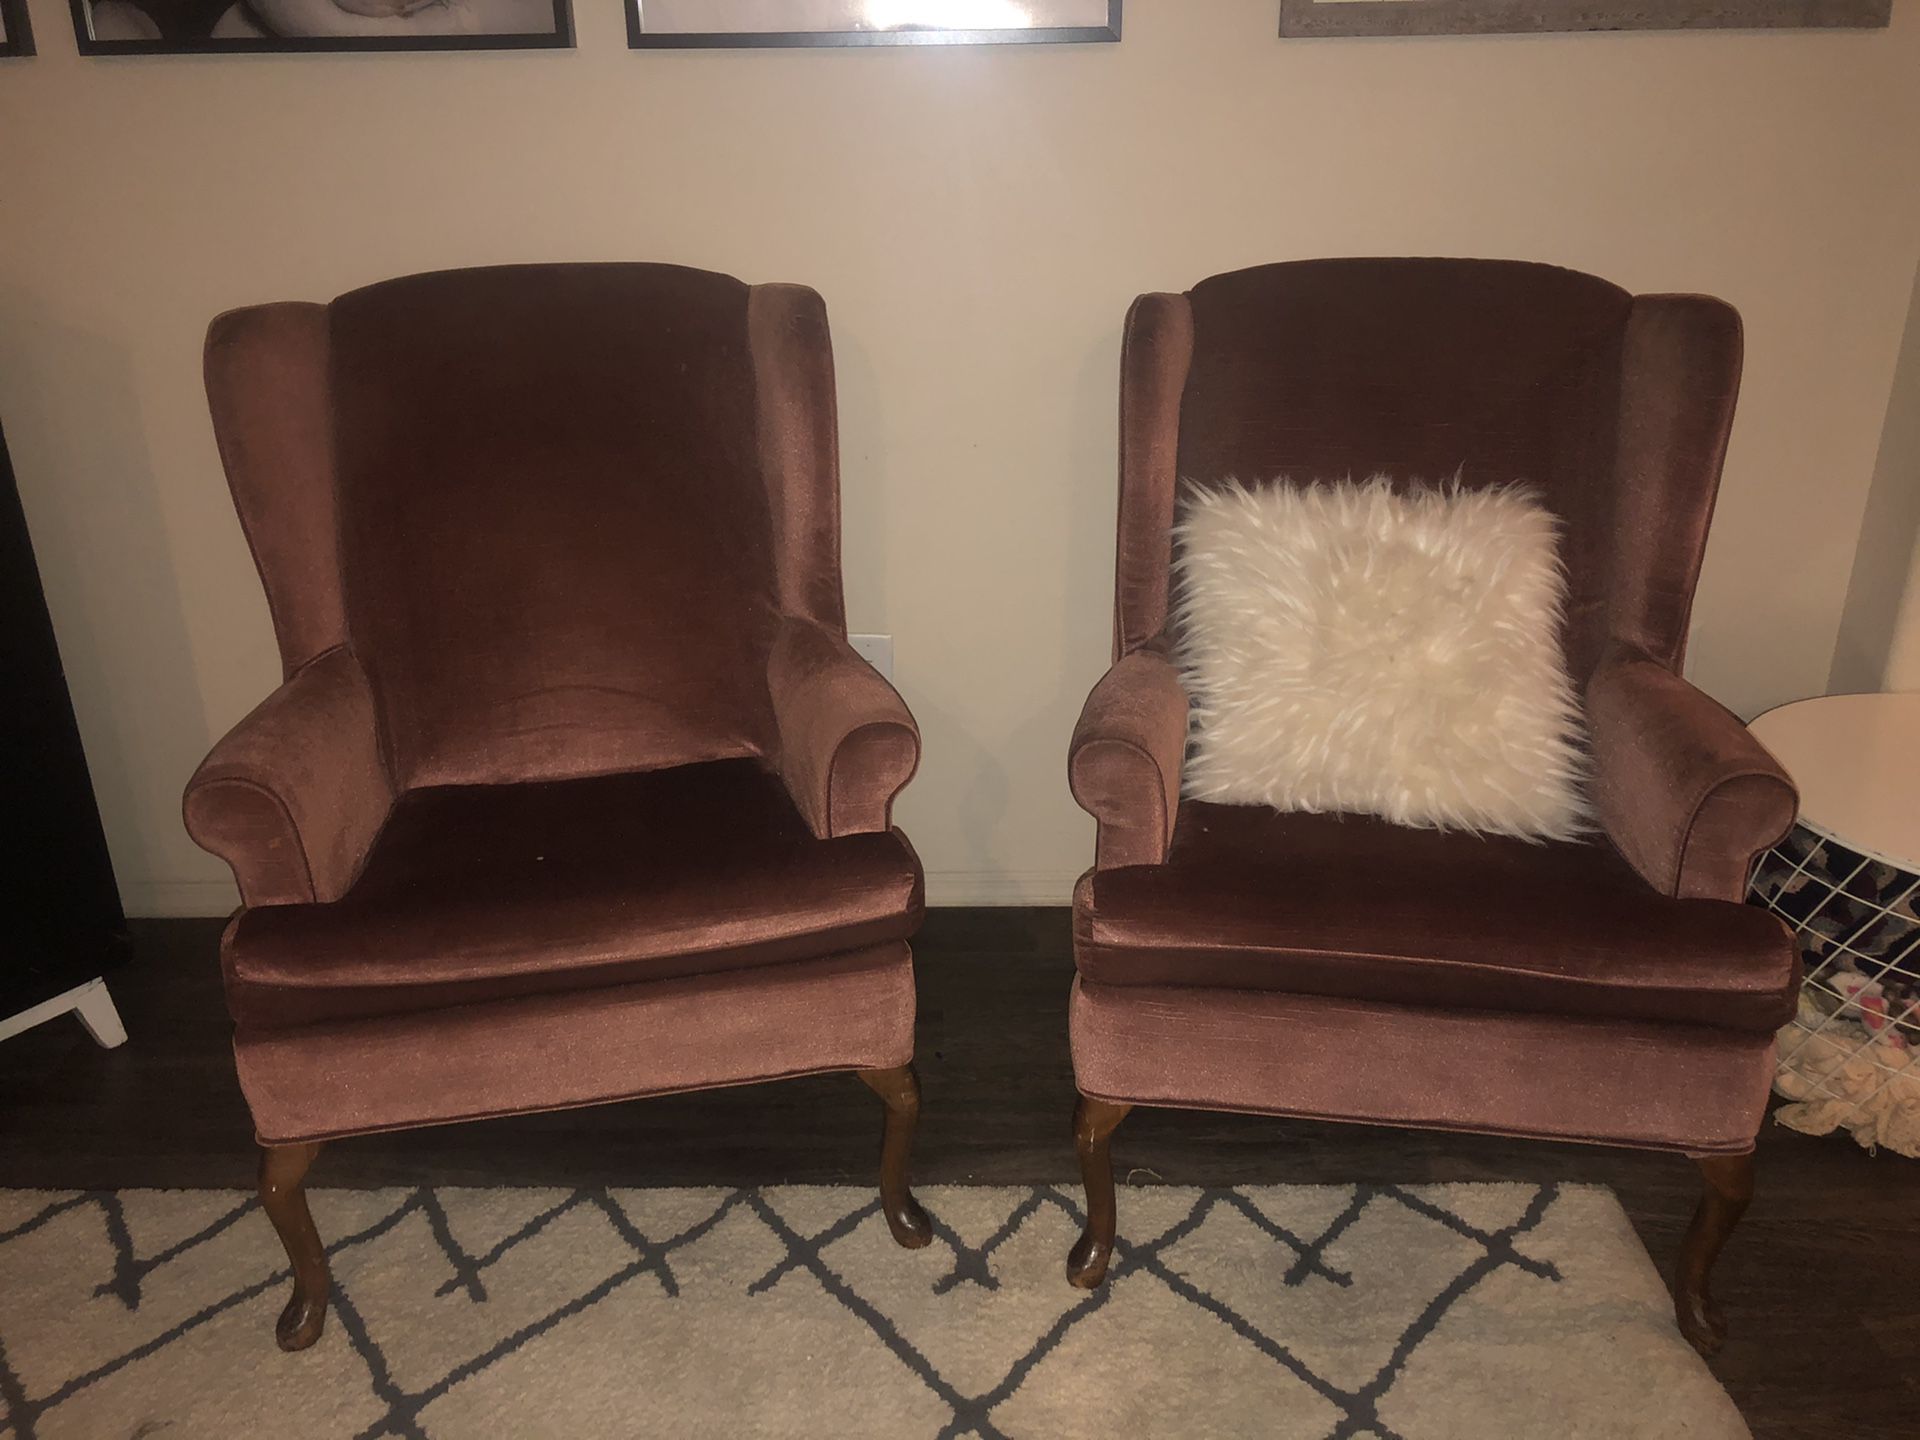 Antique wingback chairs